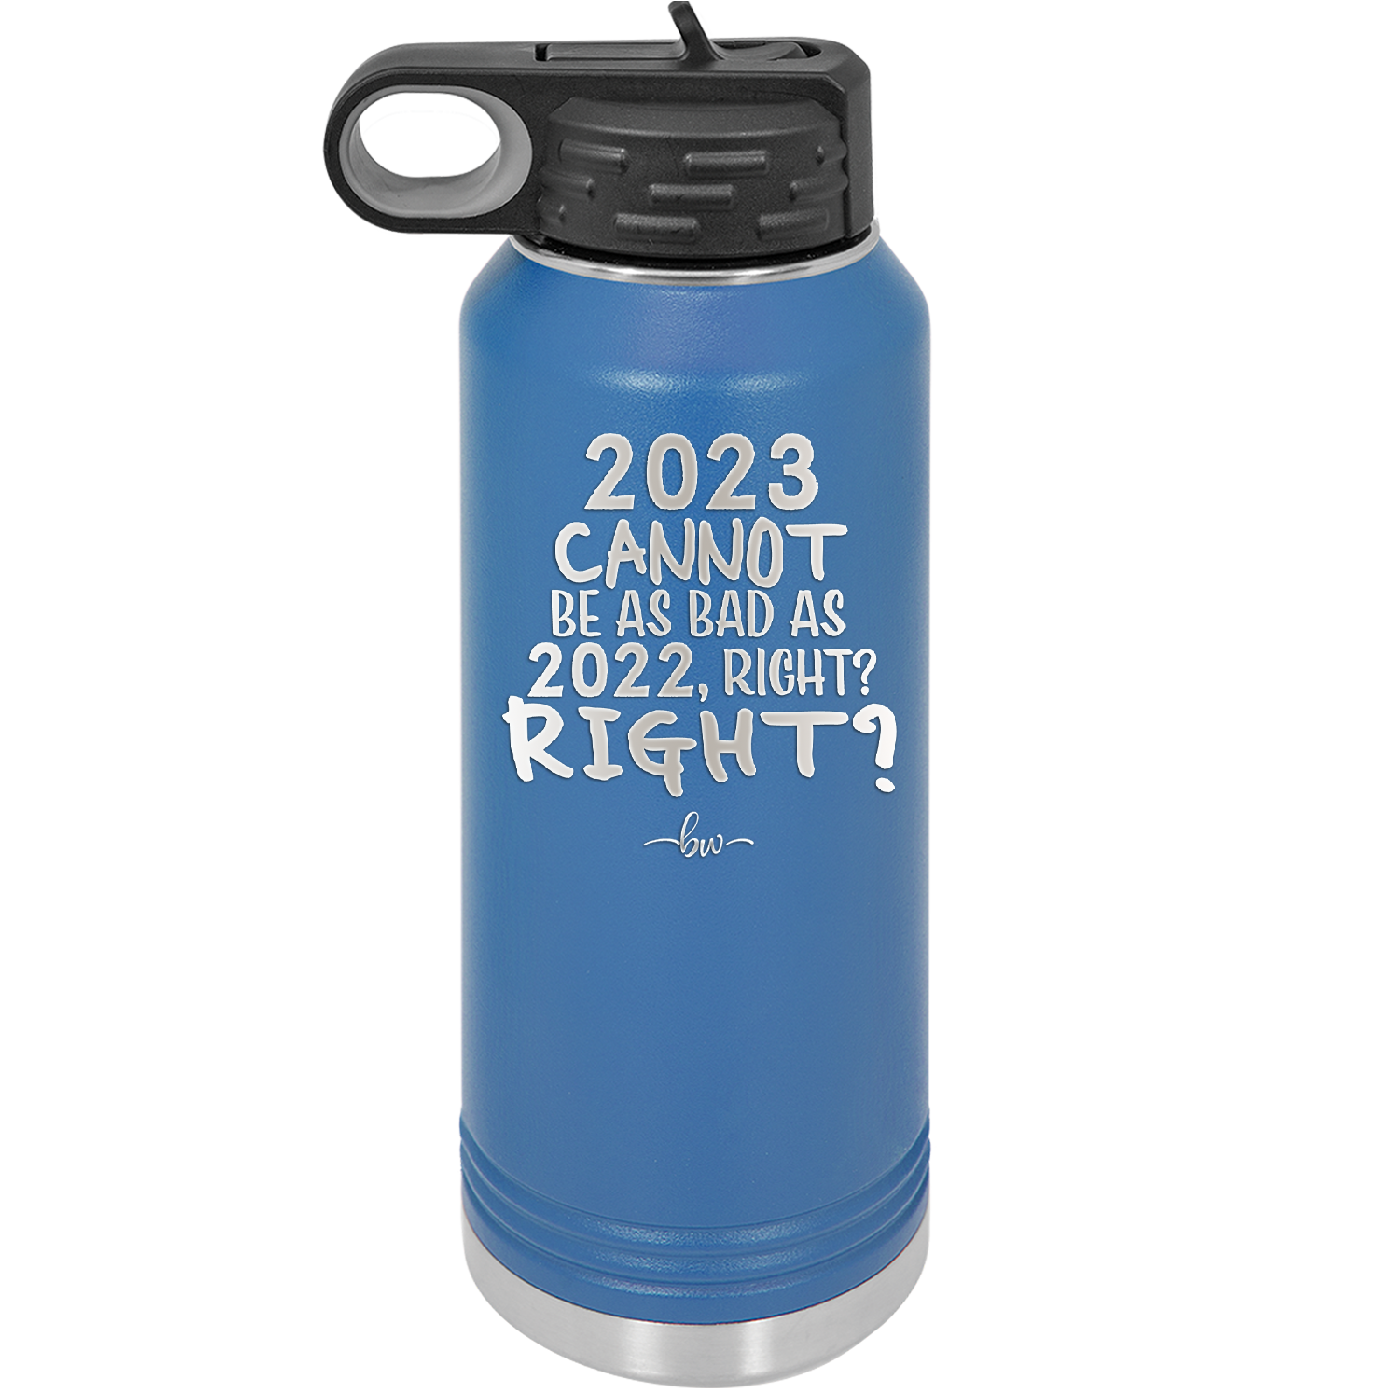 32 oz water bottle 2023 cannot be as bas as 2022, right?right? -  royal